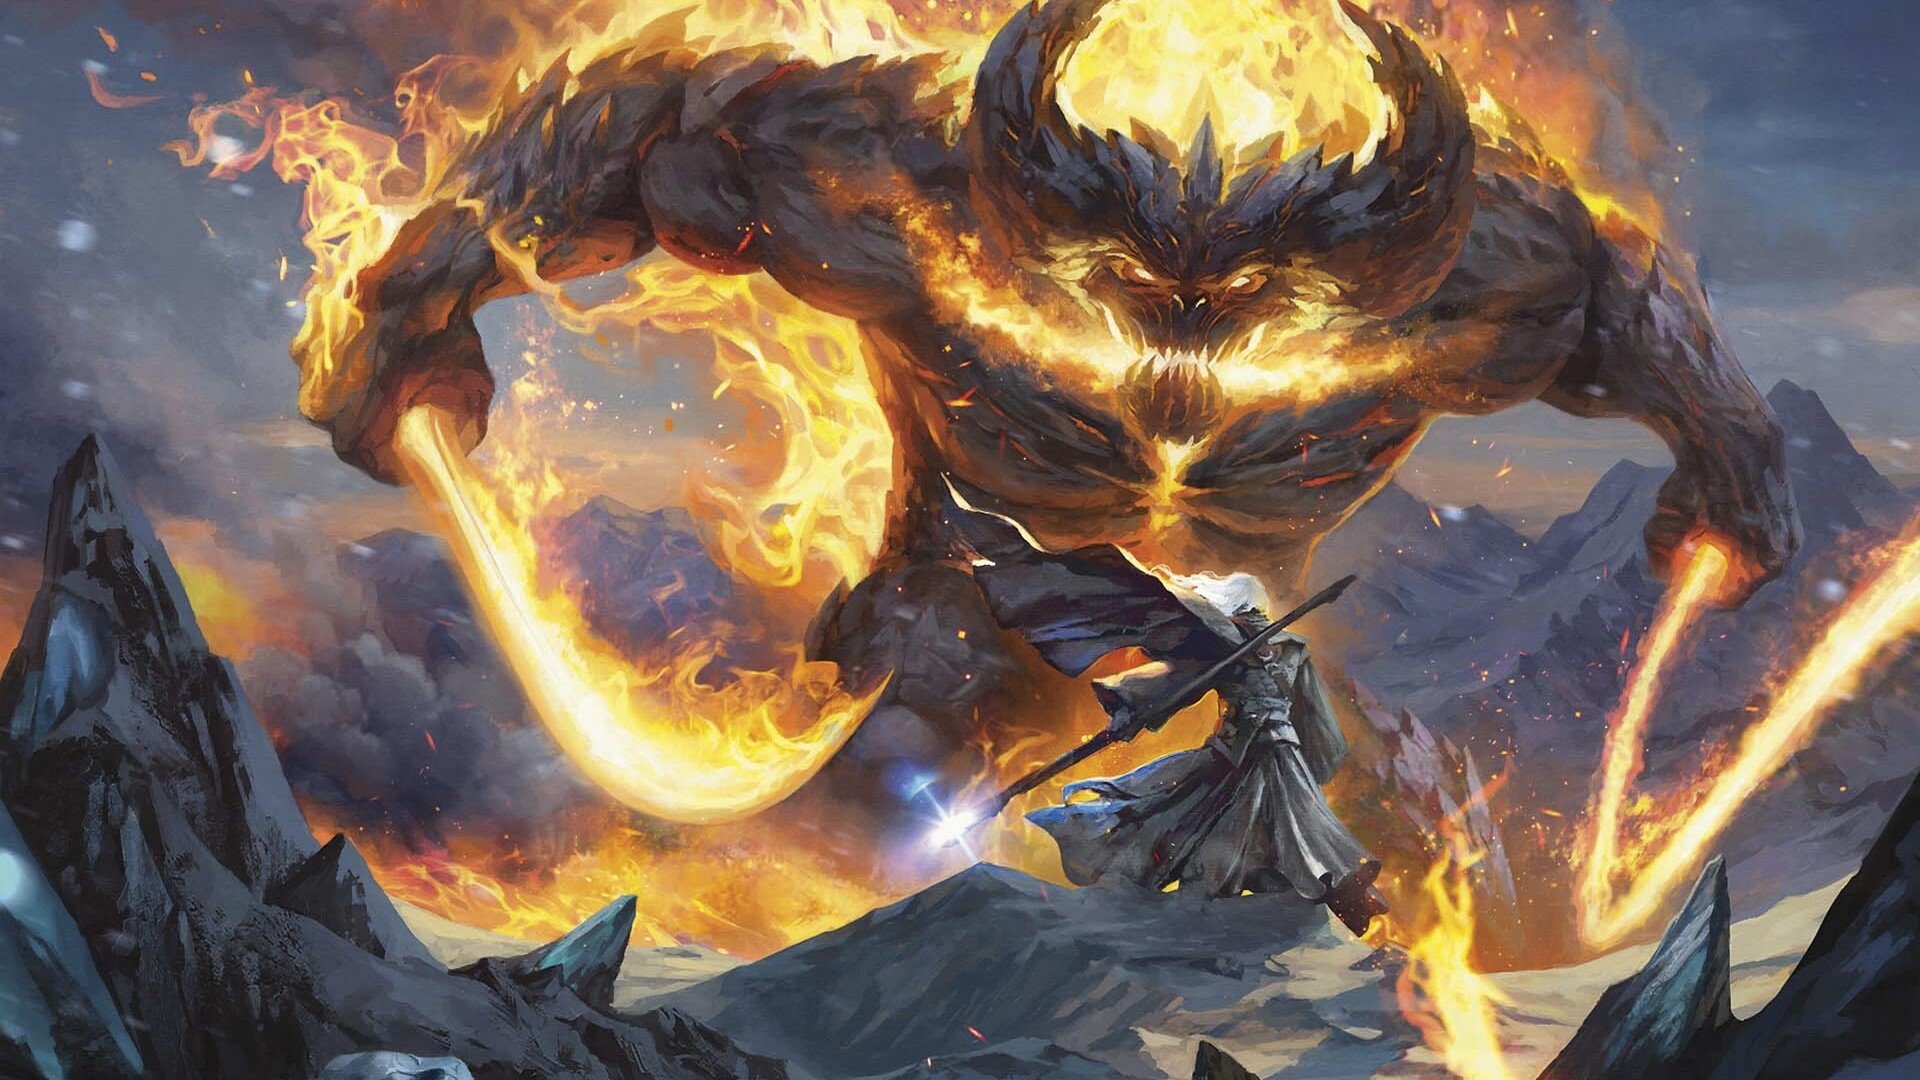 MTG 2023 release schedule - Wizards of the Coast art of gandalf from lord of the rings standing before a balrog on a mountain.